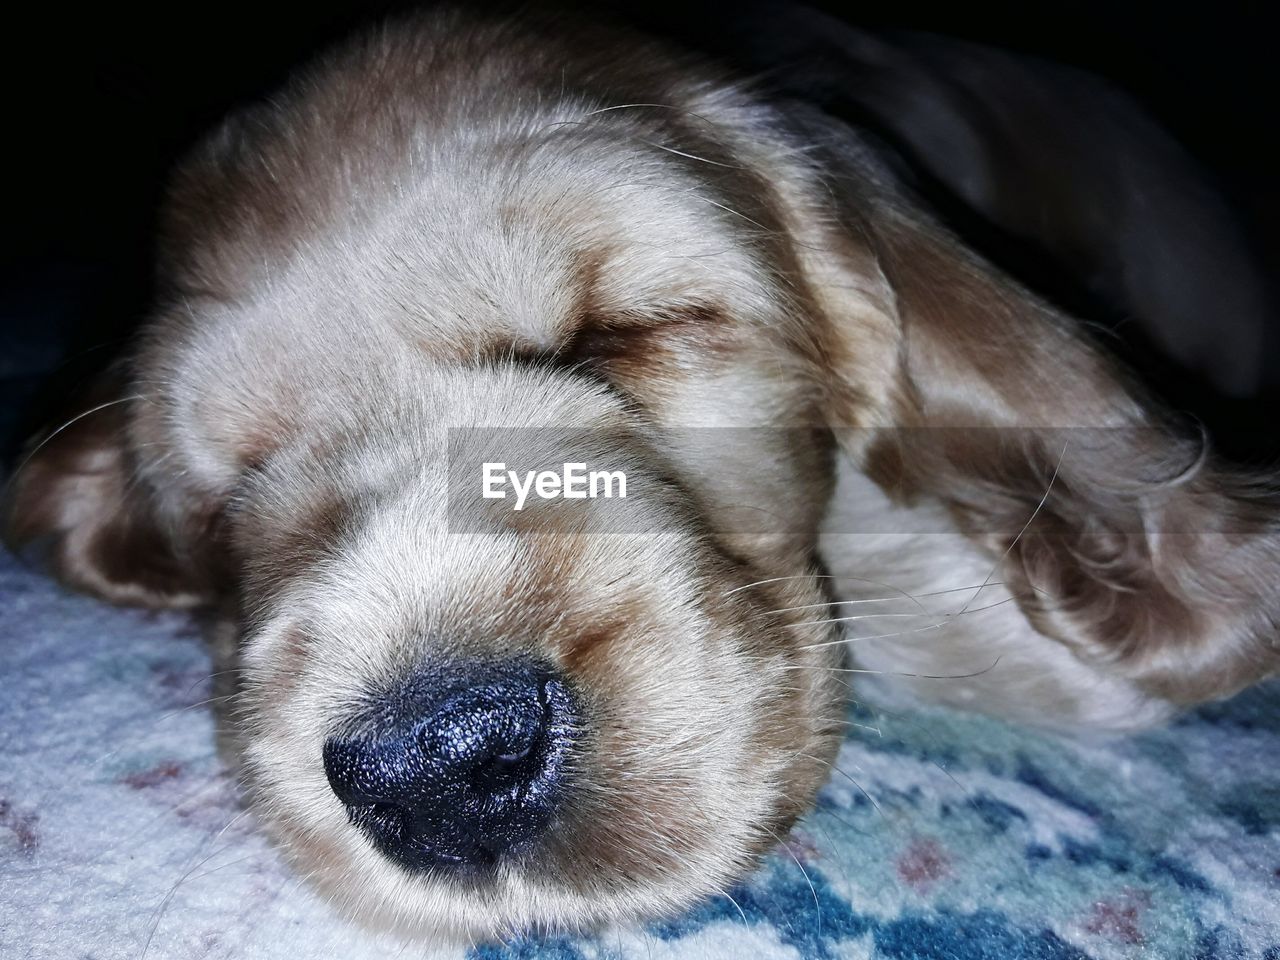 CLOSE-UP OF PUPPY SLEEPING ON BLANKET